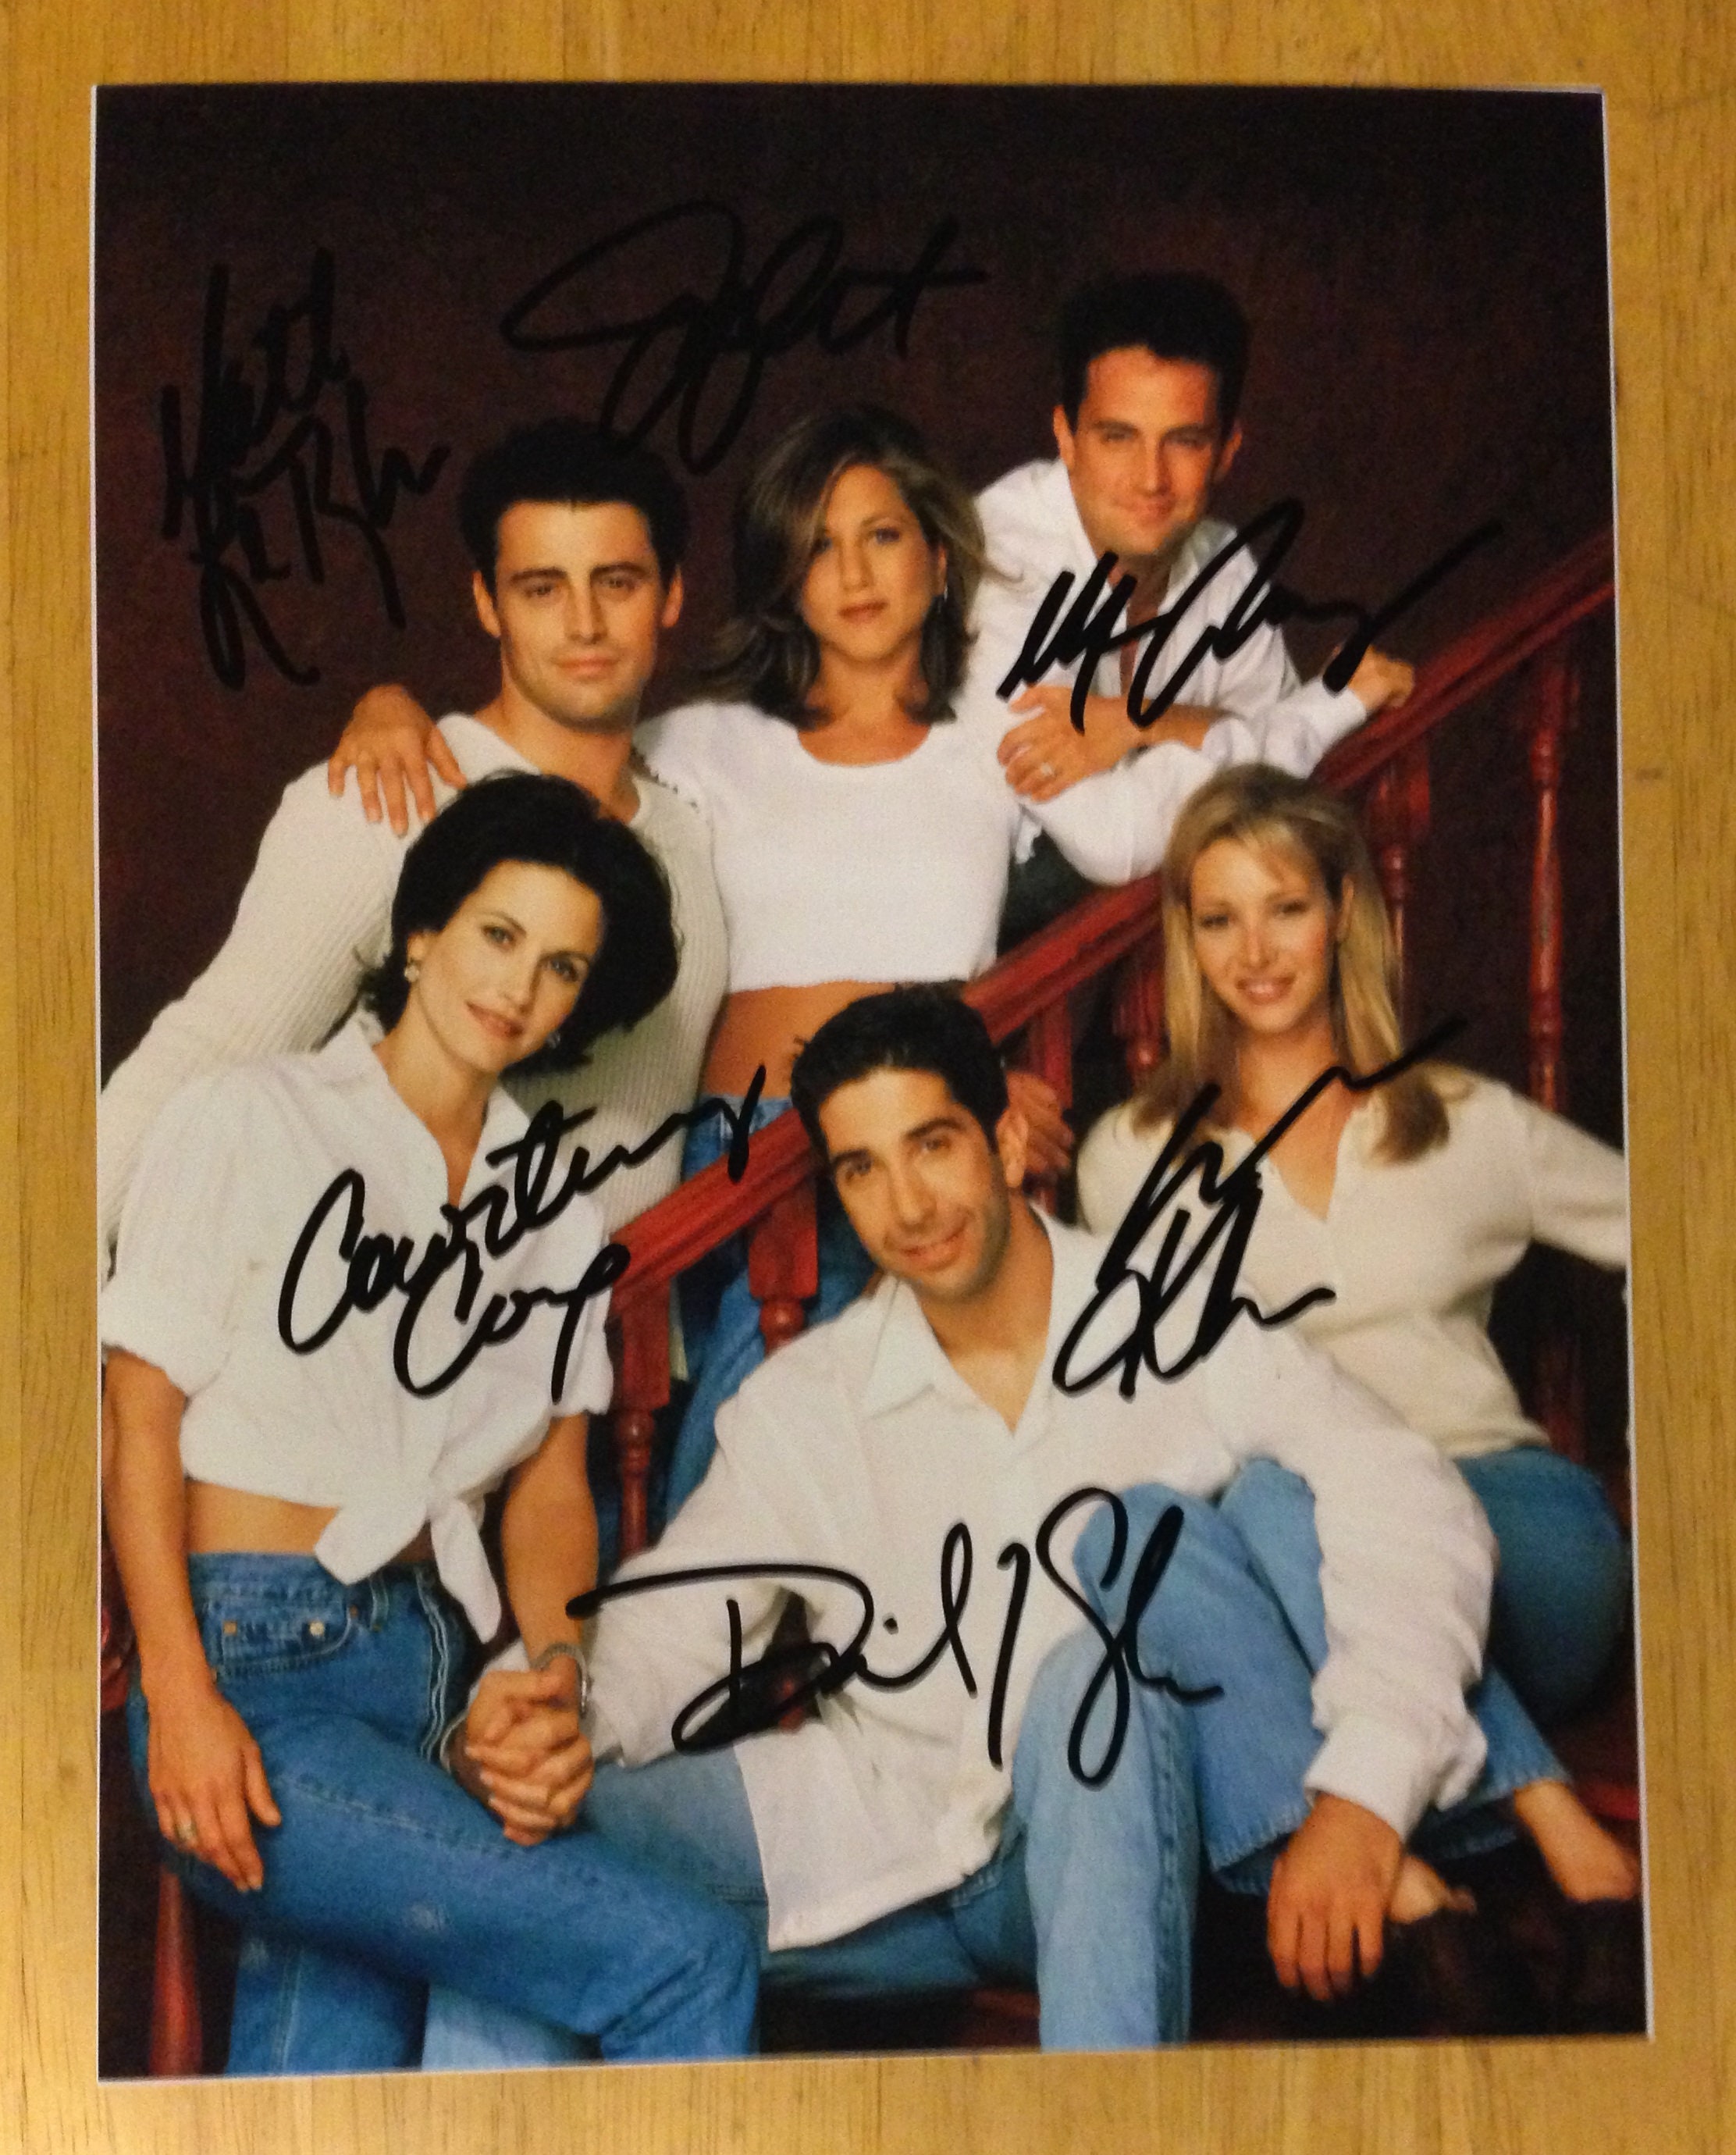 FRIENDS CAST #1 REPRINT SIGNED 8X10 PHOTO AUTOGRAPHED PICTURE CHRISTMAS GIFT 